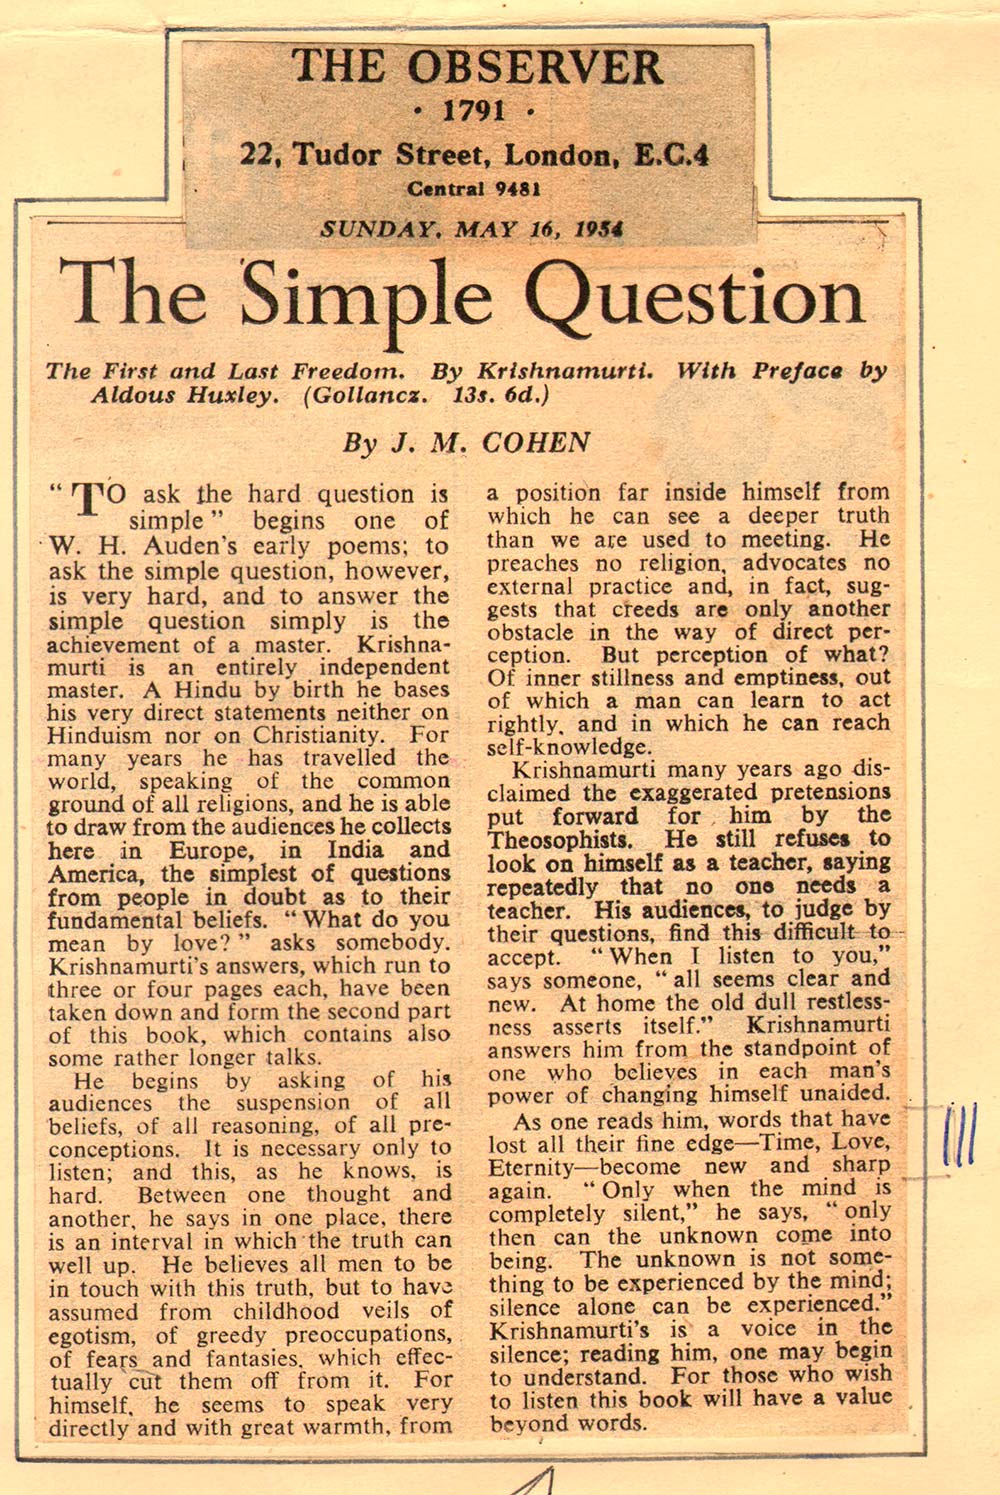 1954 The Observer - The Simple Question